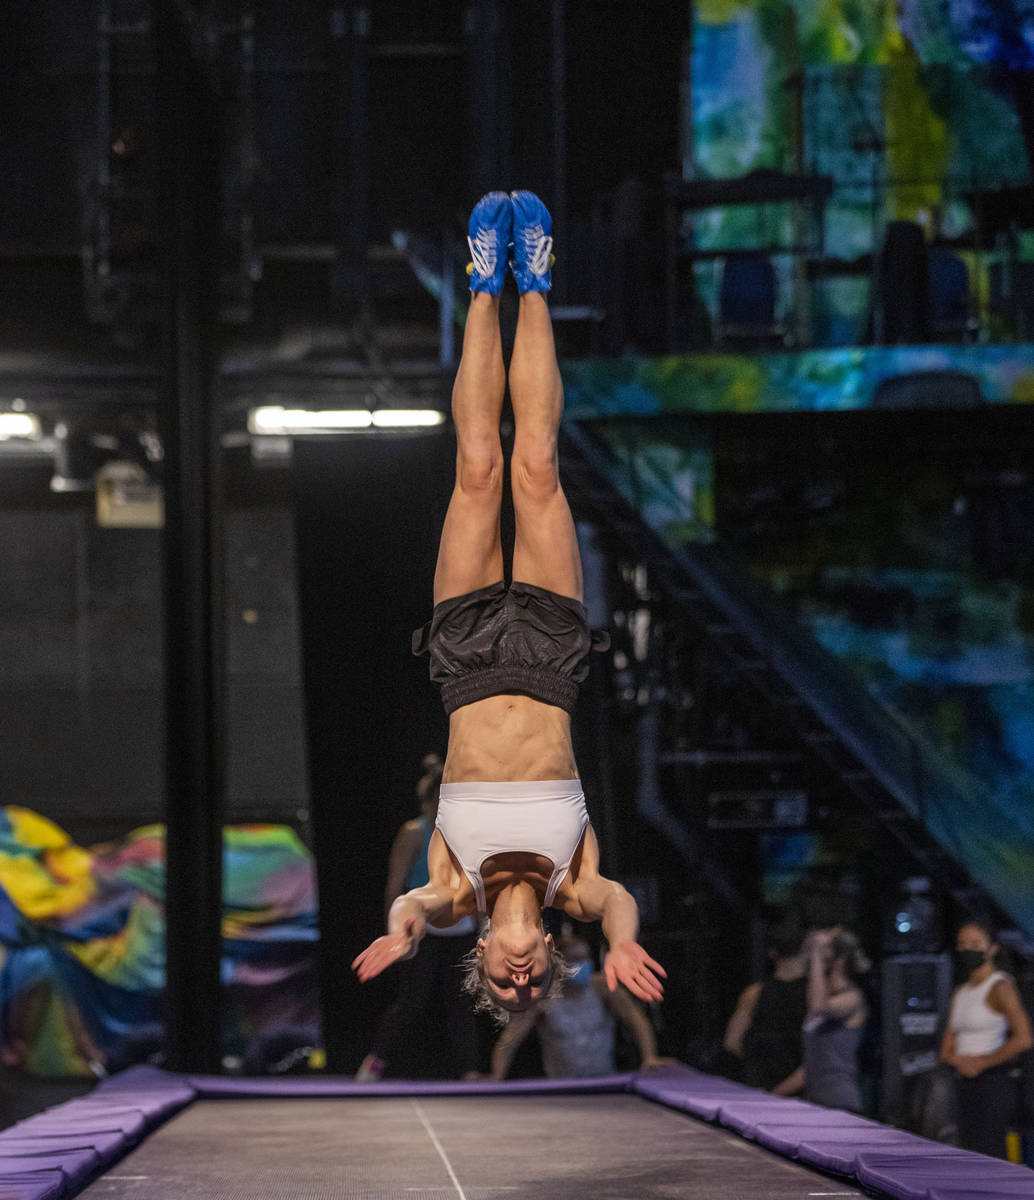 Acrobat Sarah Turner practices flips on a power track trampoline during rehearsals for "My ...